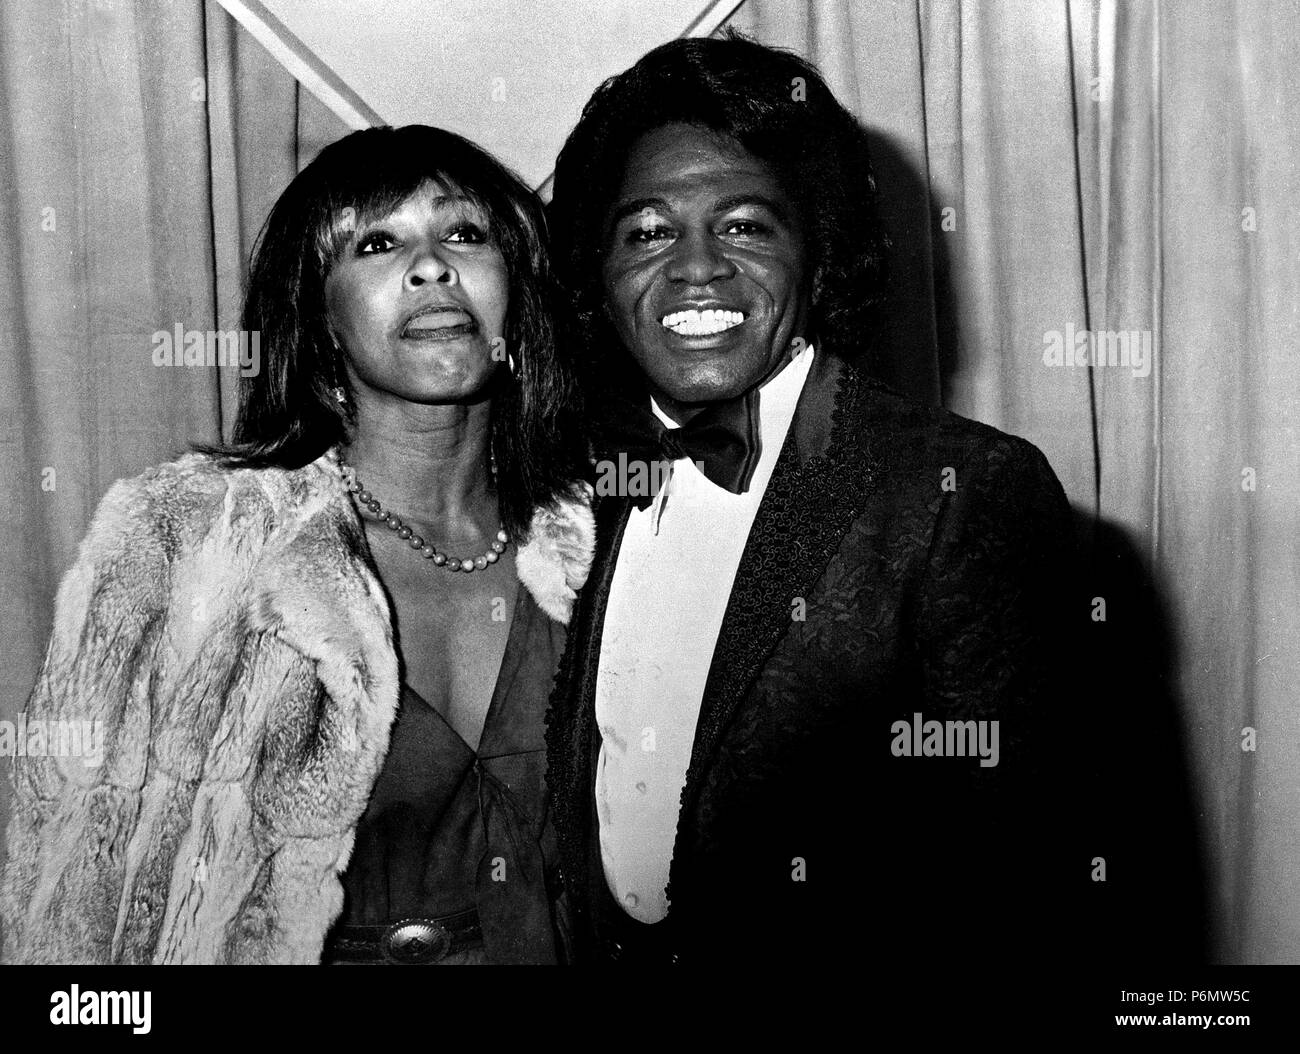 Tina Turner with James Brown in 1982 at Grammy Awards. Stock Photo